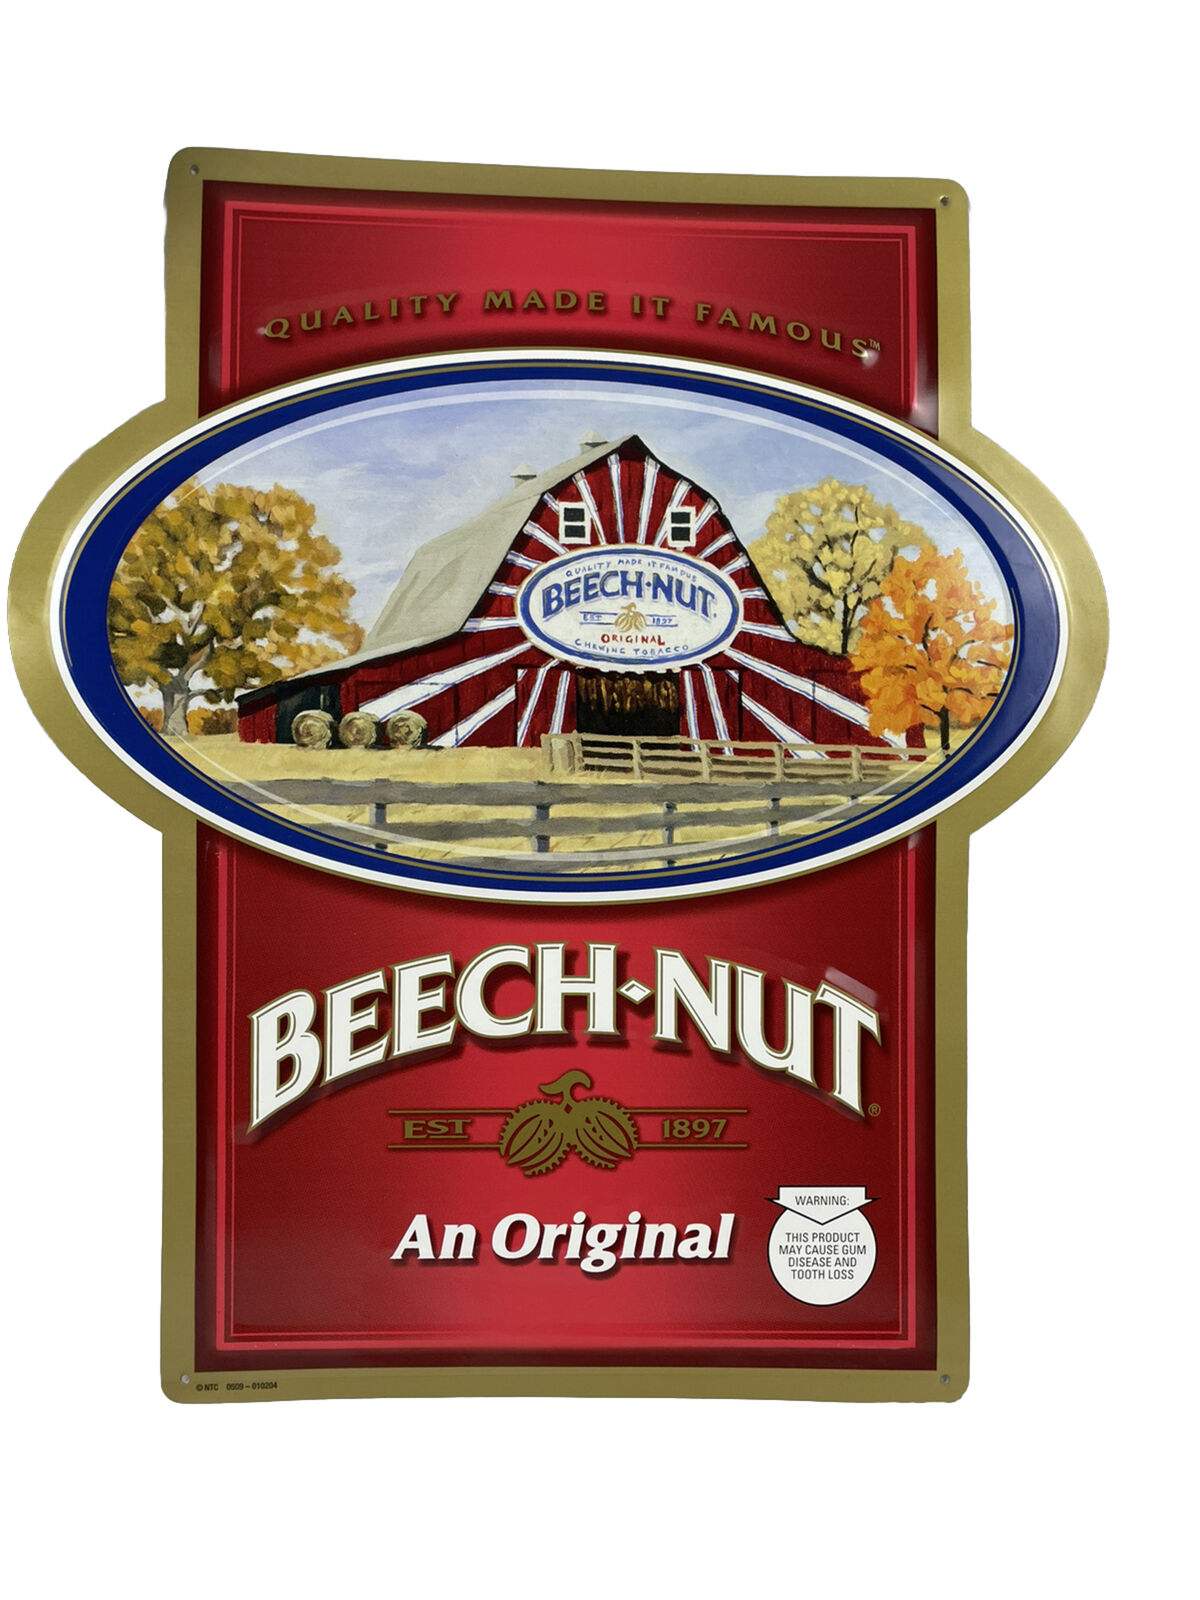 Beech-Nut An Original Quality Famous Chewing Tobacco Metal Tin Sign